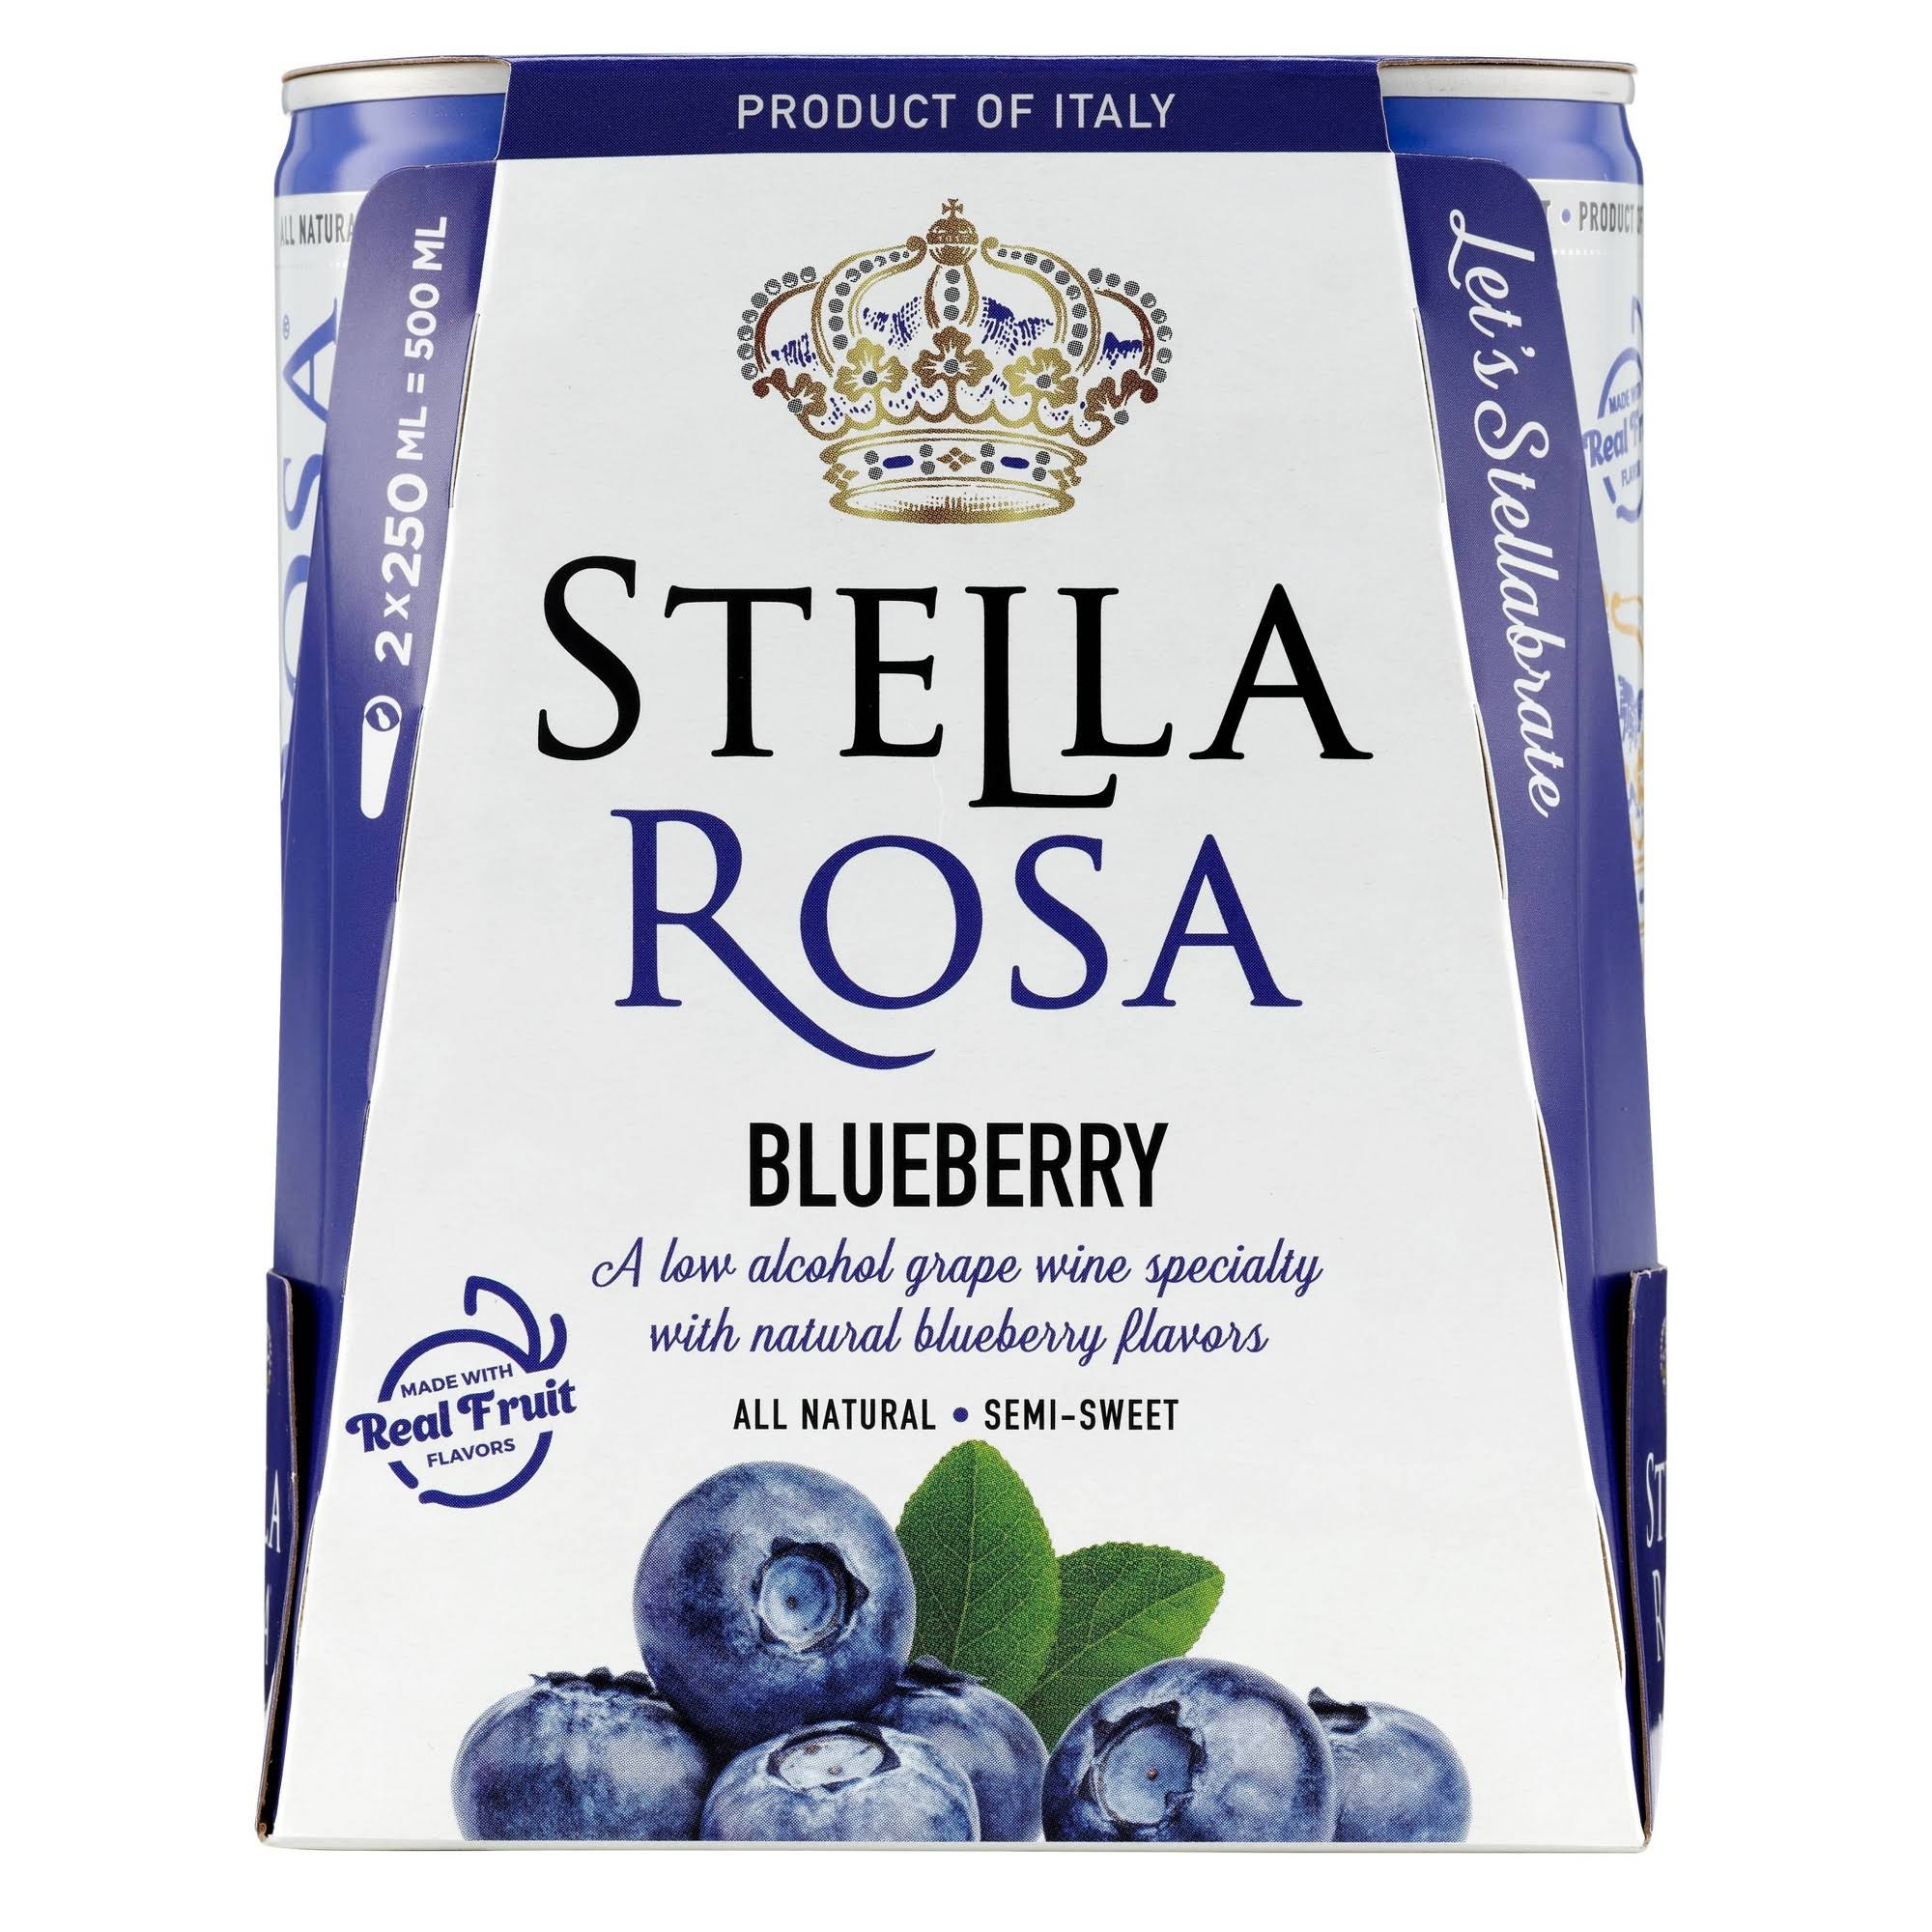 Stella Rosa Blueberry - 2 pack, 250 ml cans